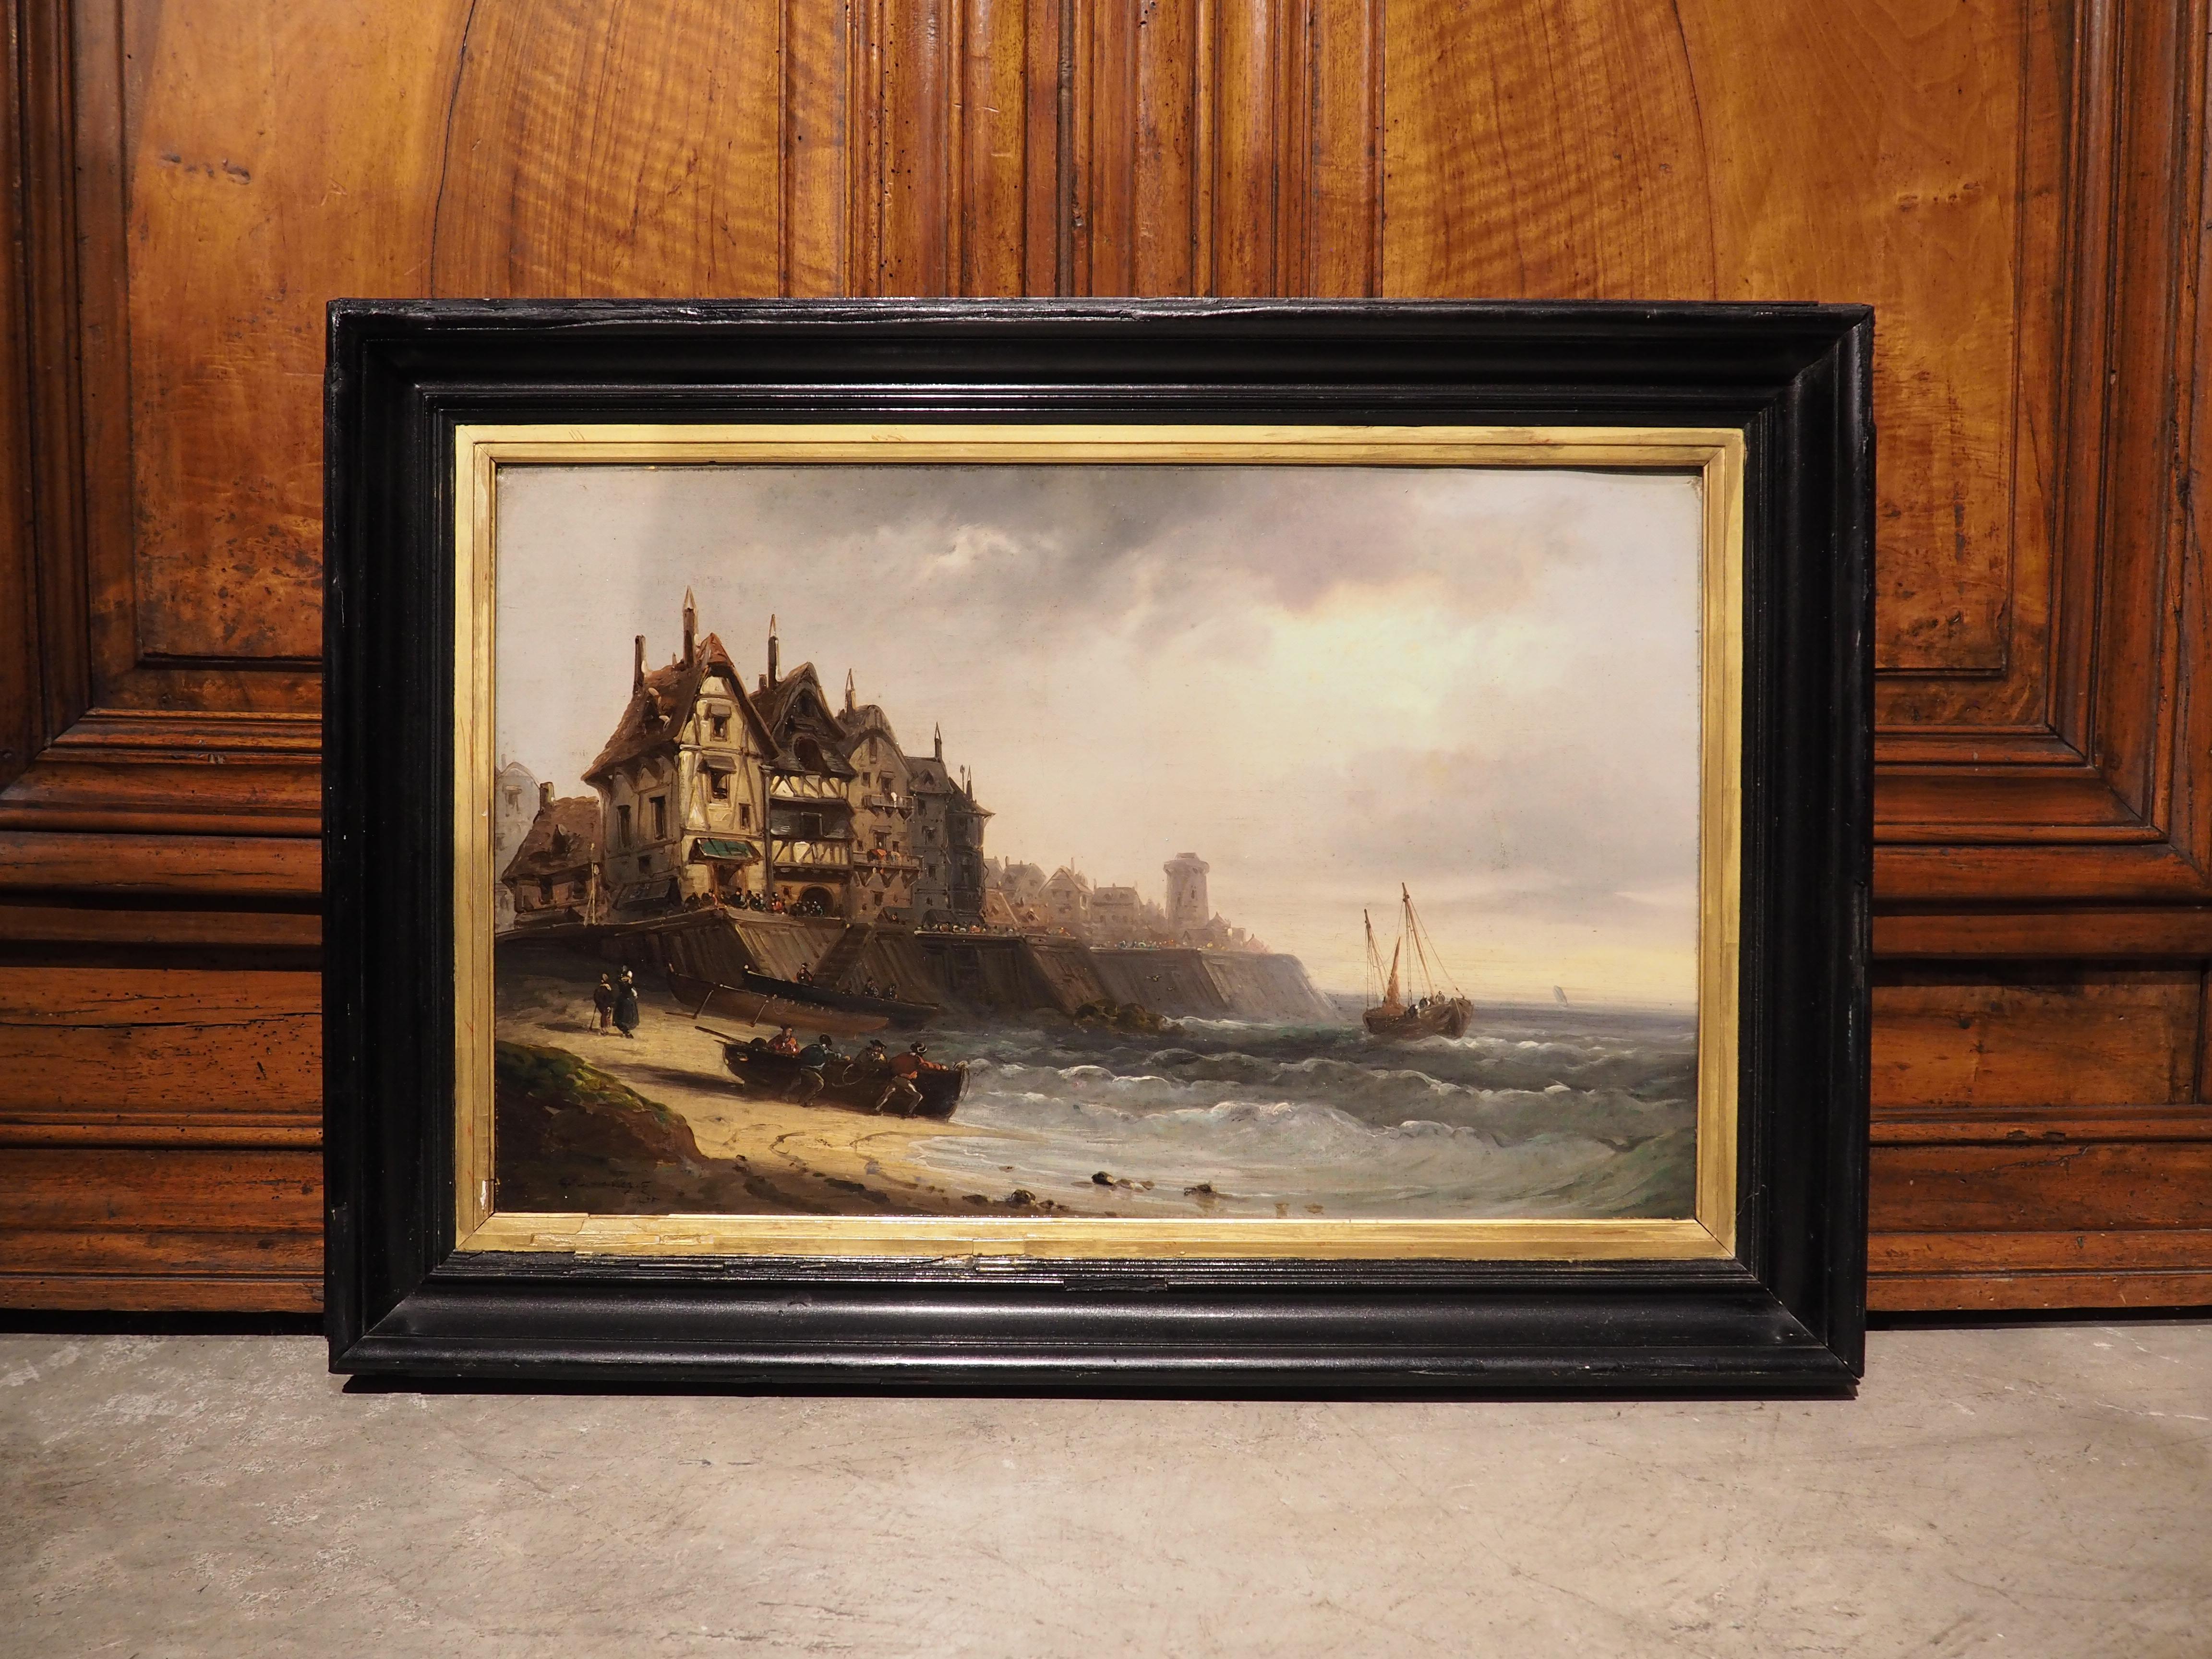 Inspired by his voyages as a sailor, the French painter Charles Kuwasseg painted this impressive coastal landscape painting in the 1870’s (the canvas is signed and dated in the lower left corner). Multistory timber framed buildings of various